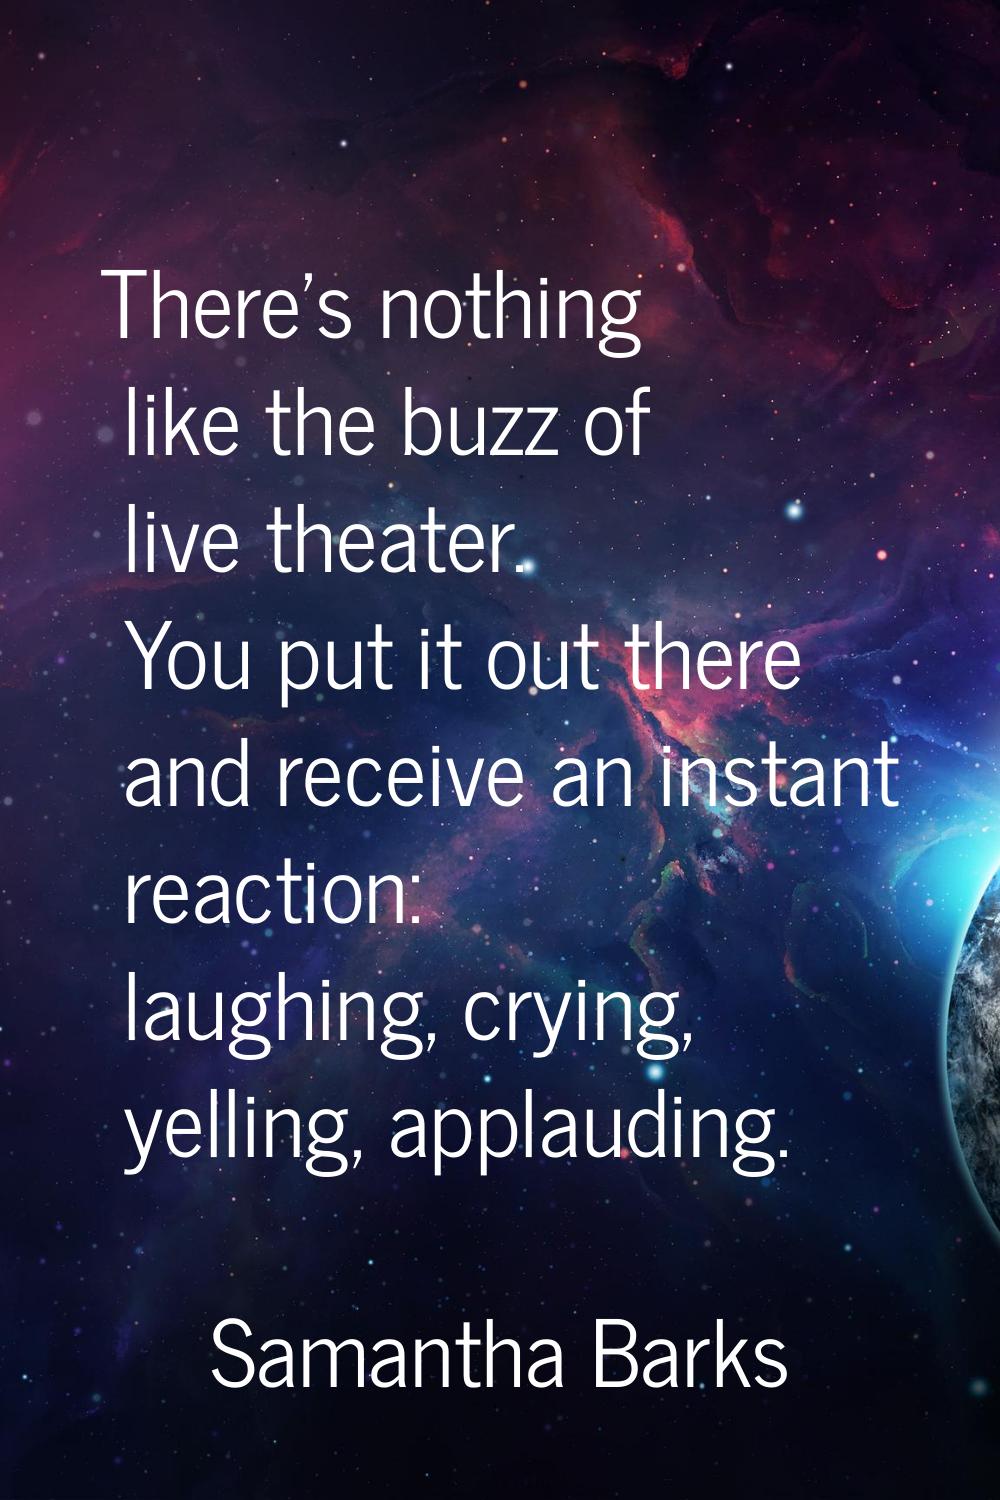 There's nothing like the buzz of live theater. You put it out there and receive an instant reaction